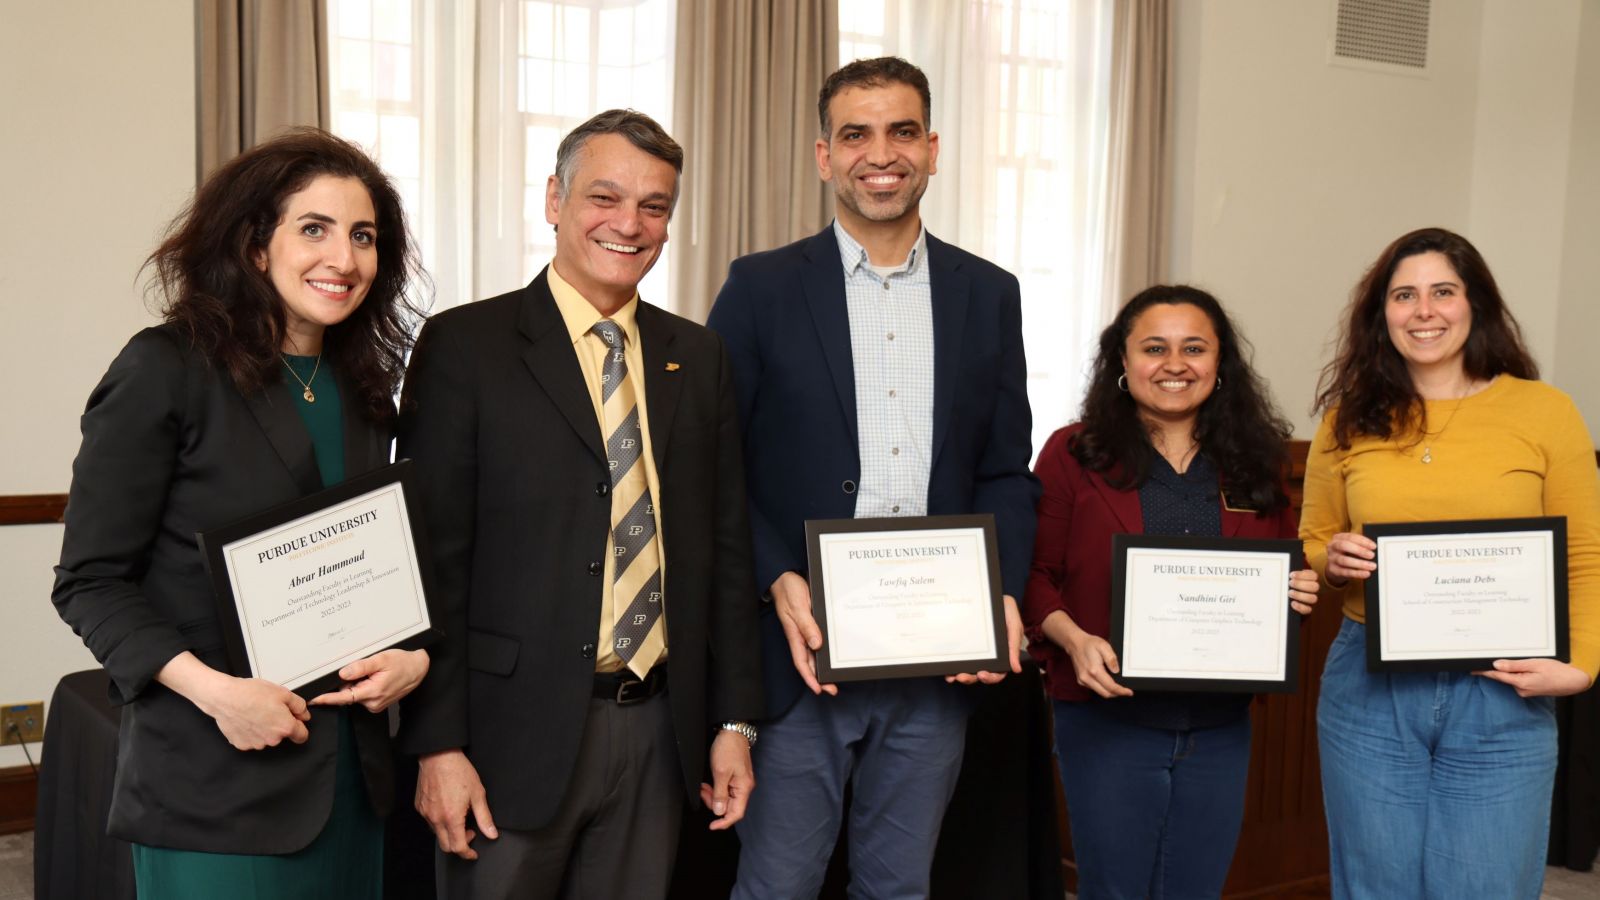 The certificate holders for Outstanding Faculty in Learning (Abrar Hammoud, Tawfiq Salem, Nandhini Giri and Luciana Debs)are pictured alongside Polytechnic Dean Daniel Castro-Lacouture. (Purdue University photo/John O'Malley)